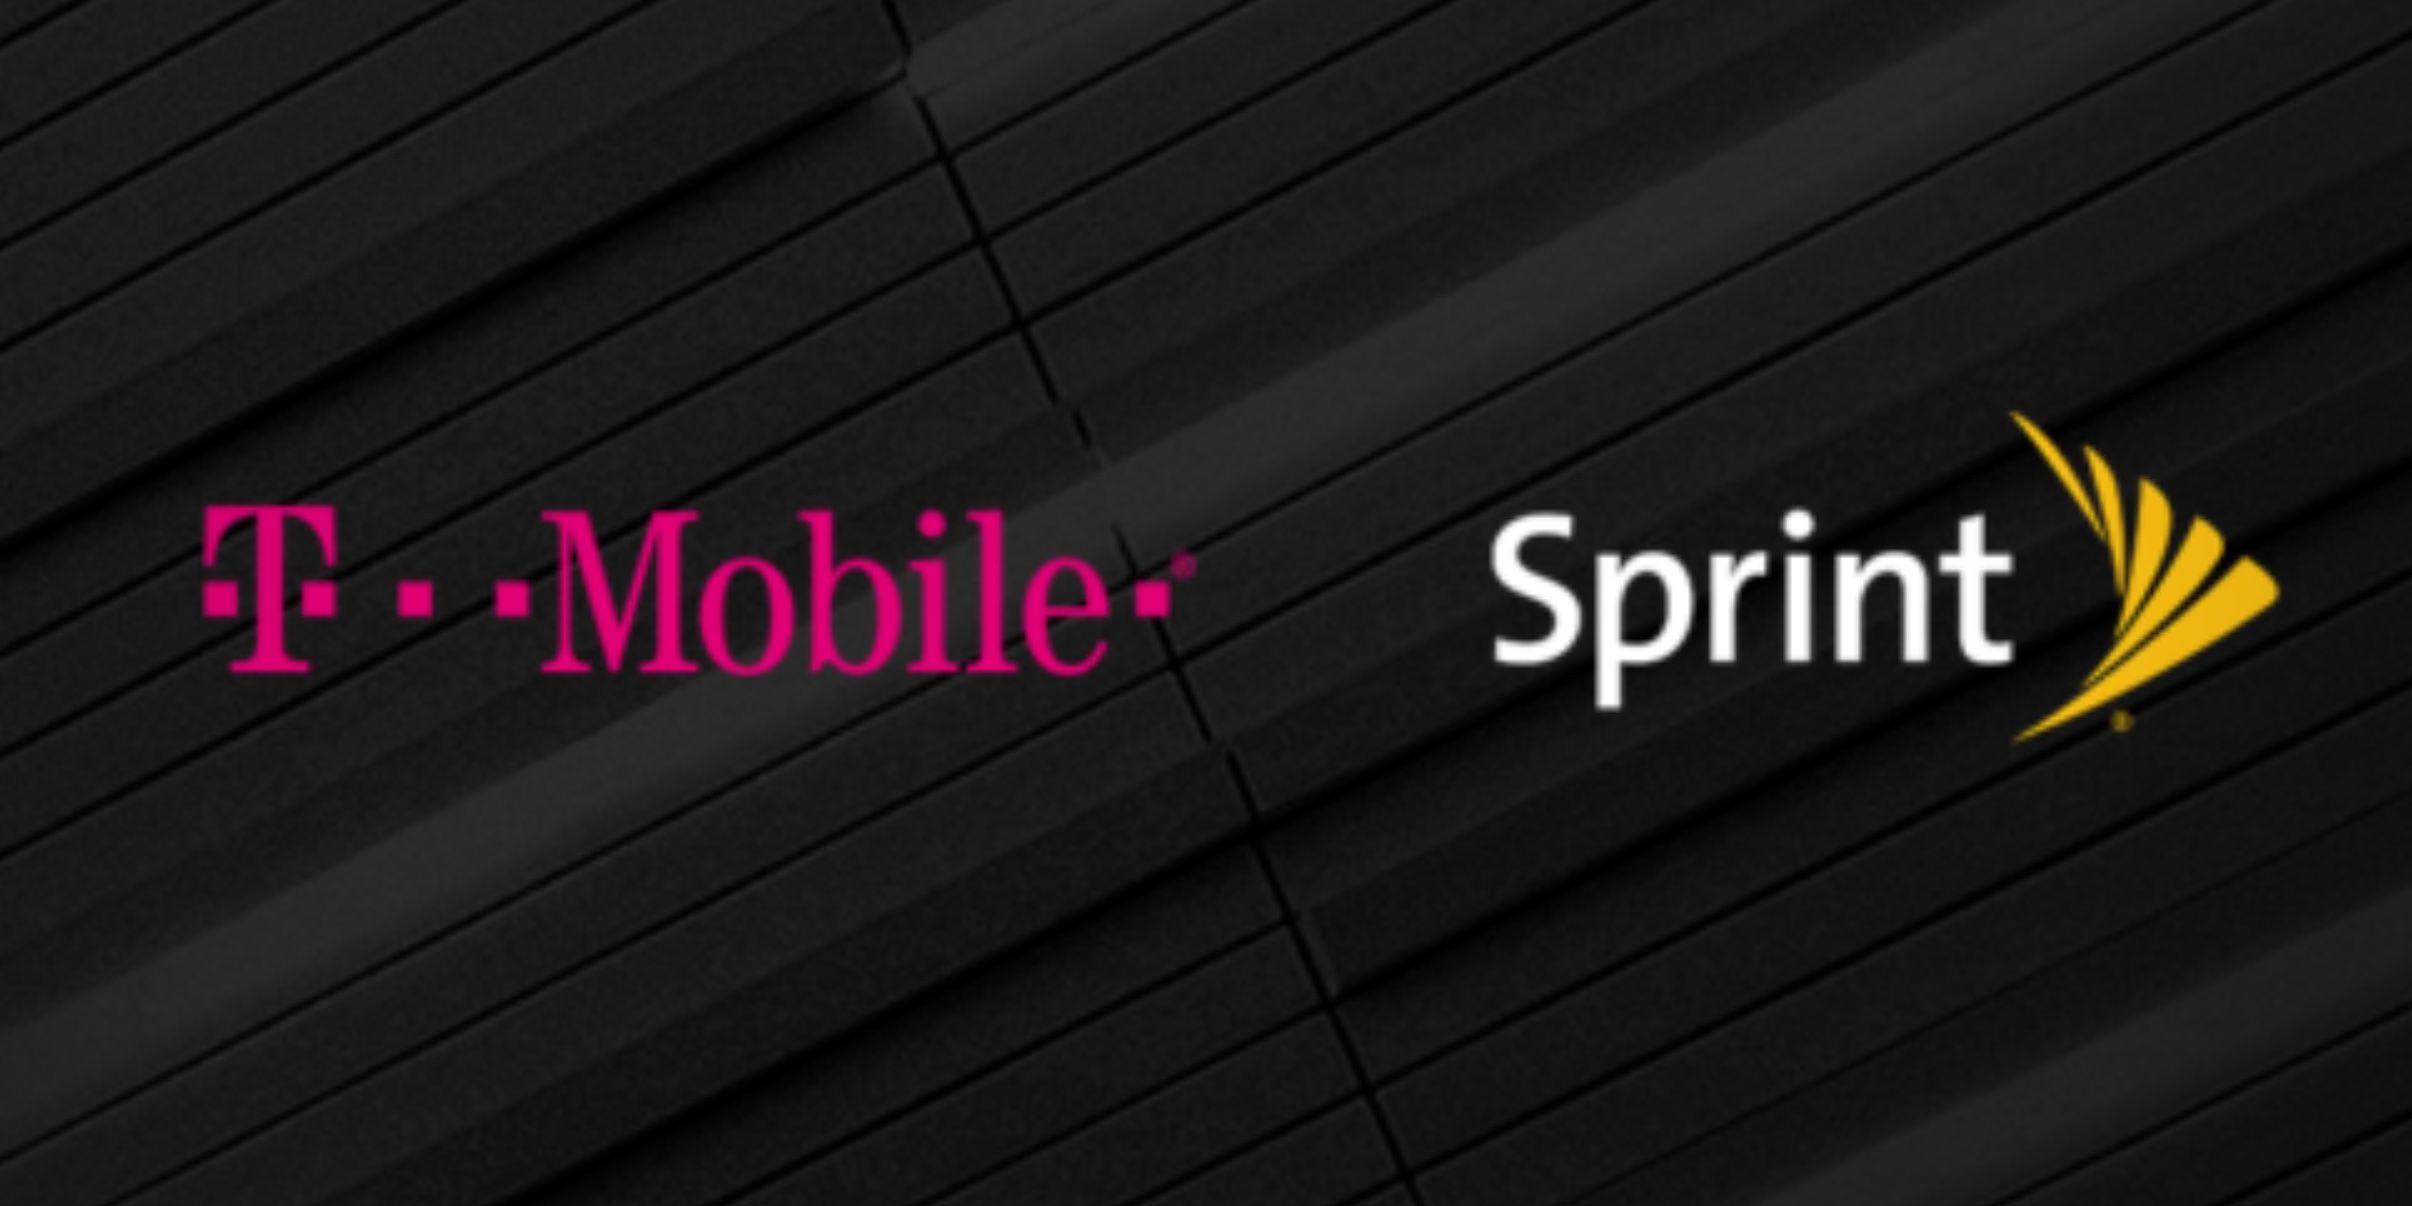 T-Mobile promo of Sprint merger.